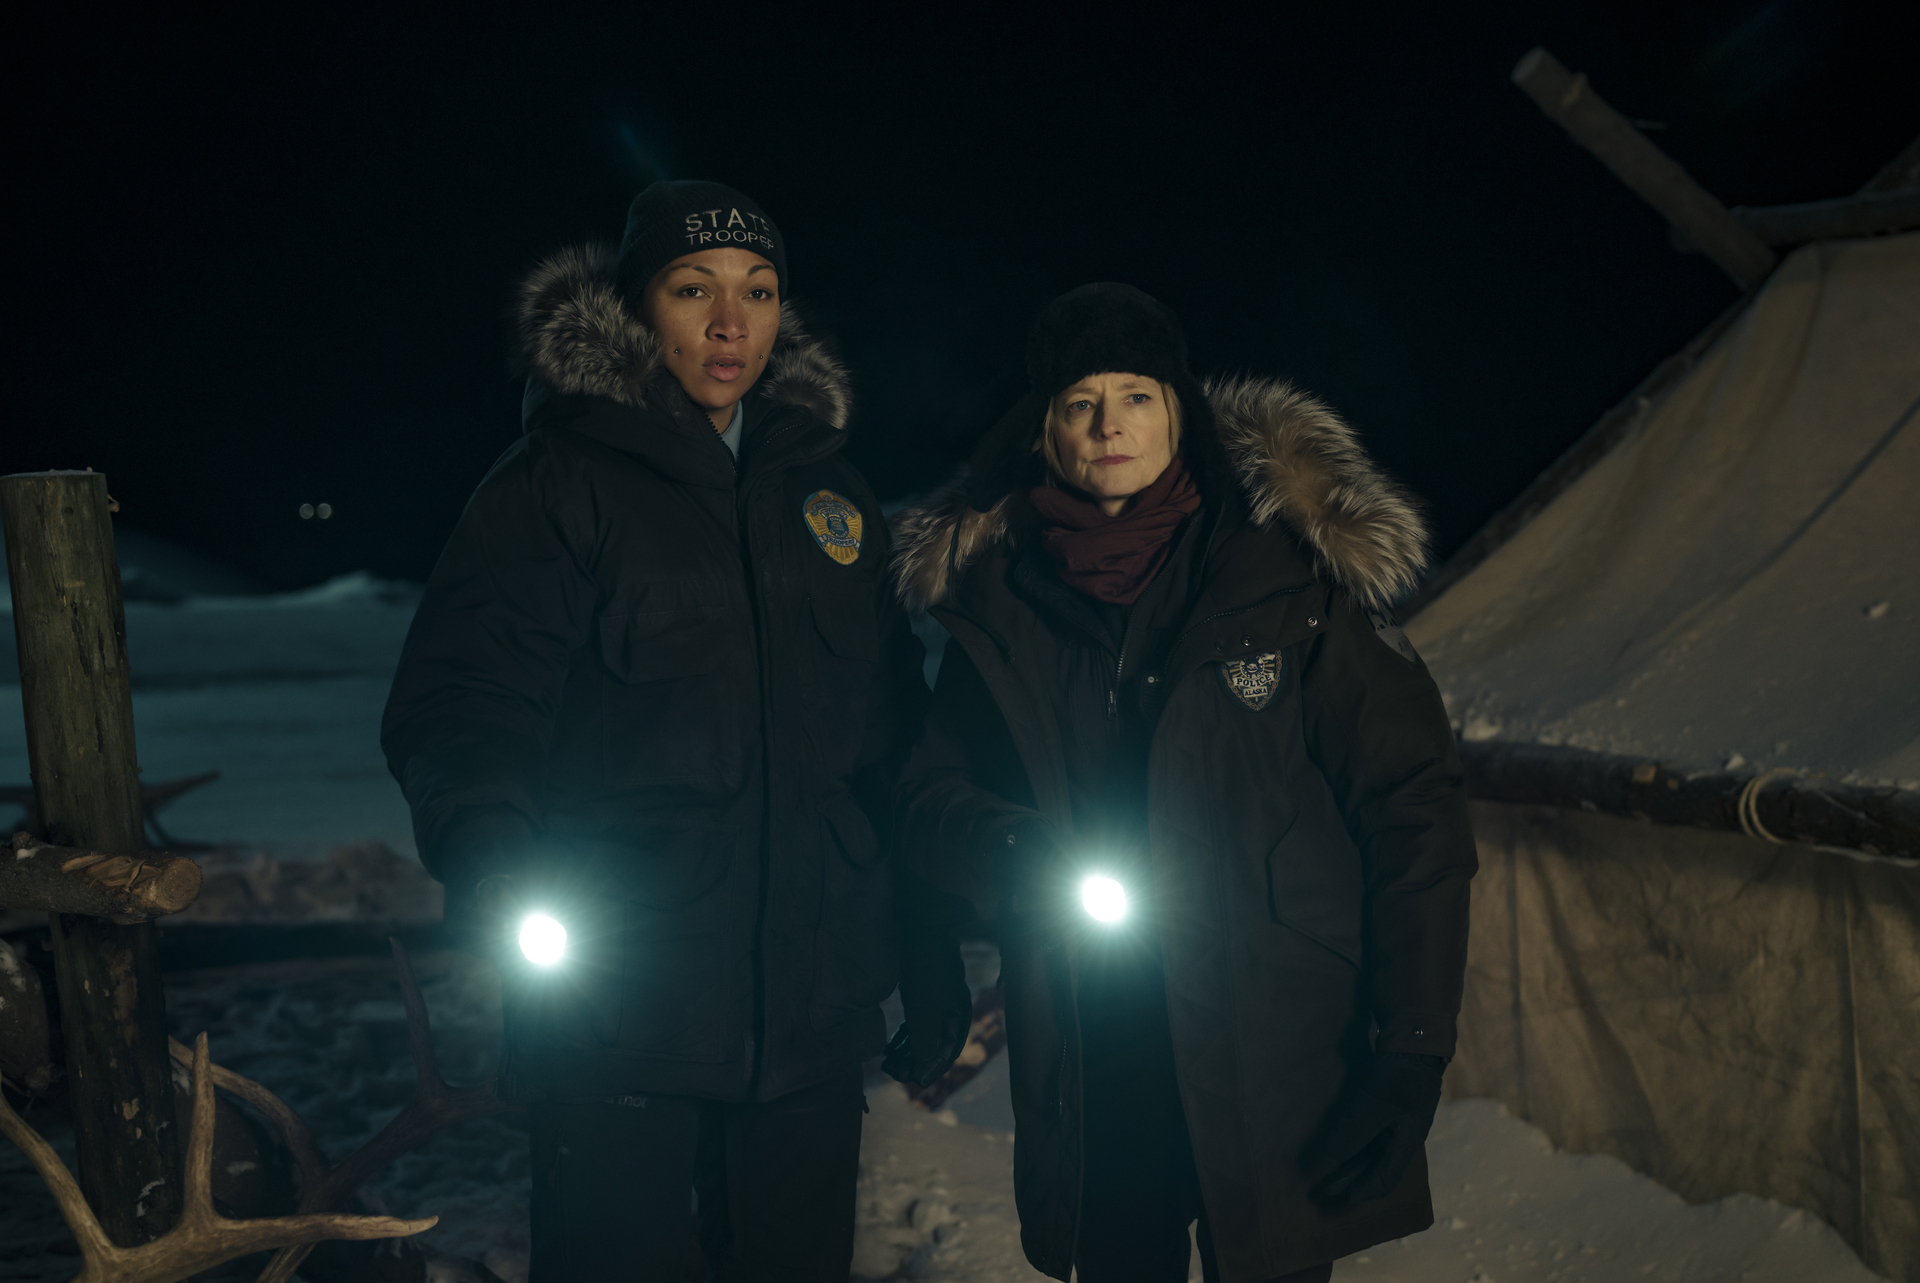 Two characters from a TV show wearing winter police uniforms, standing outside at night with flashlights